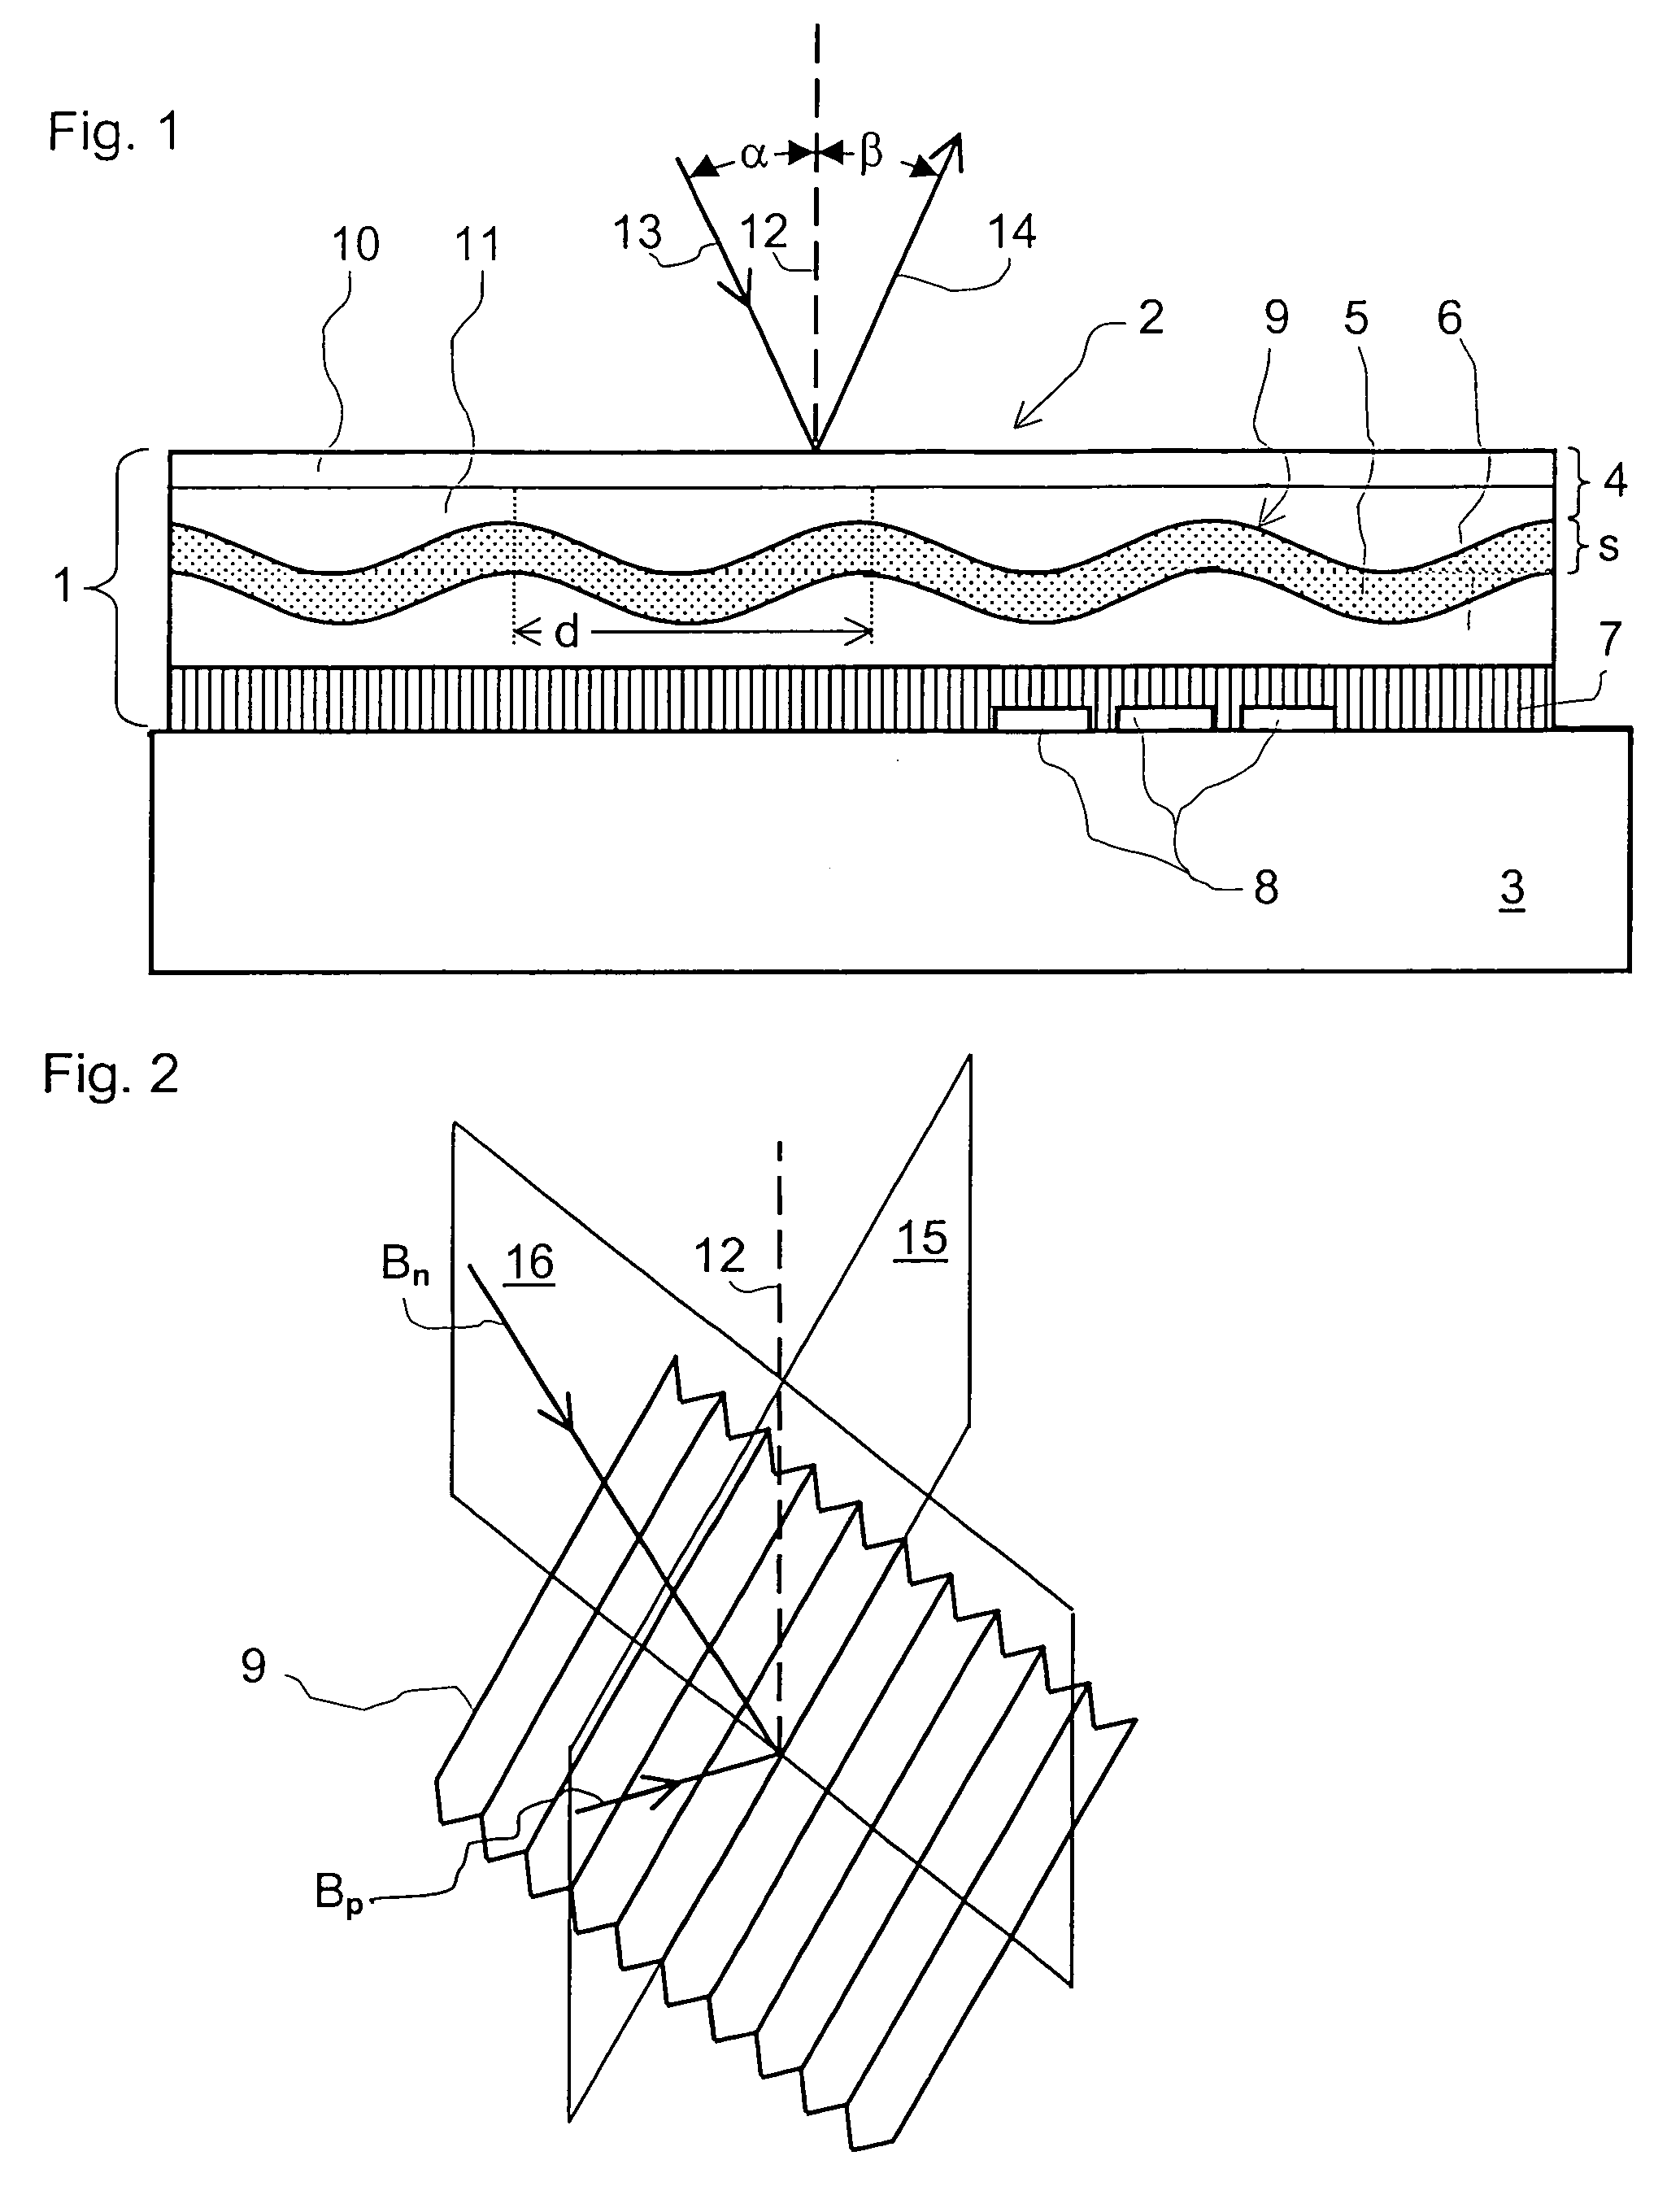 Diffractive security element having an integrated optical waveguide